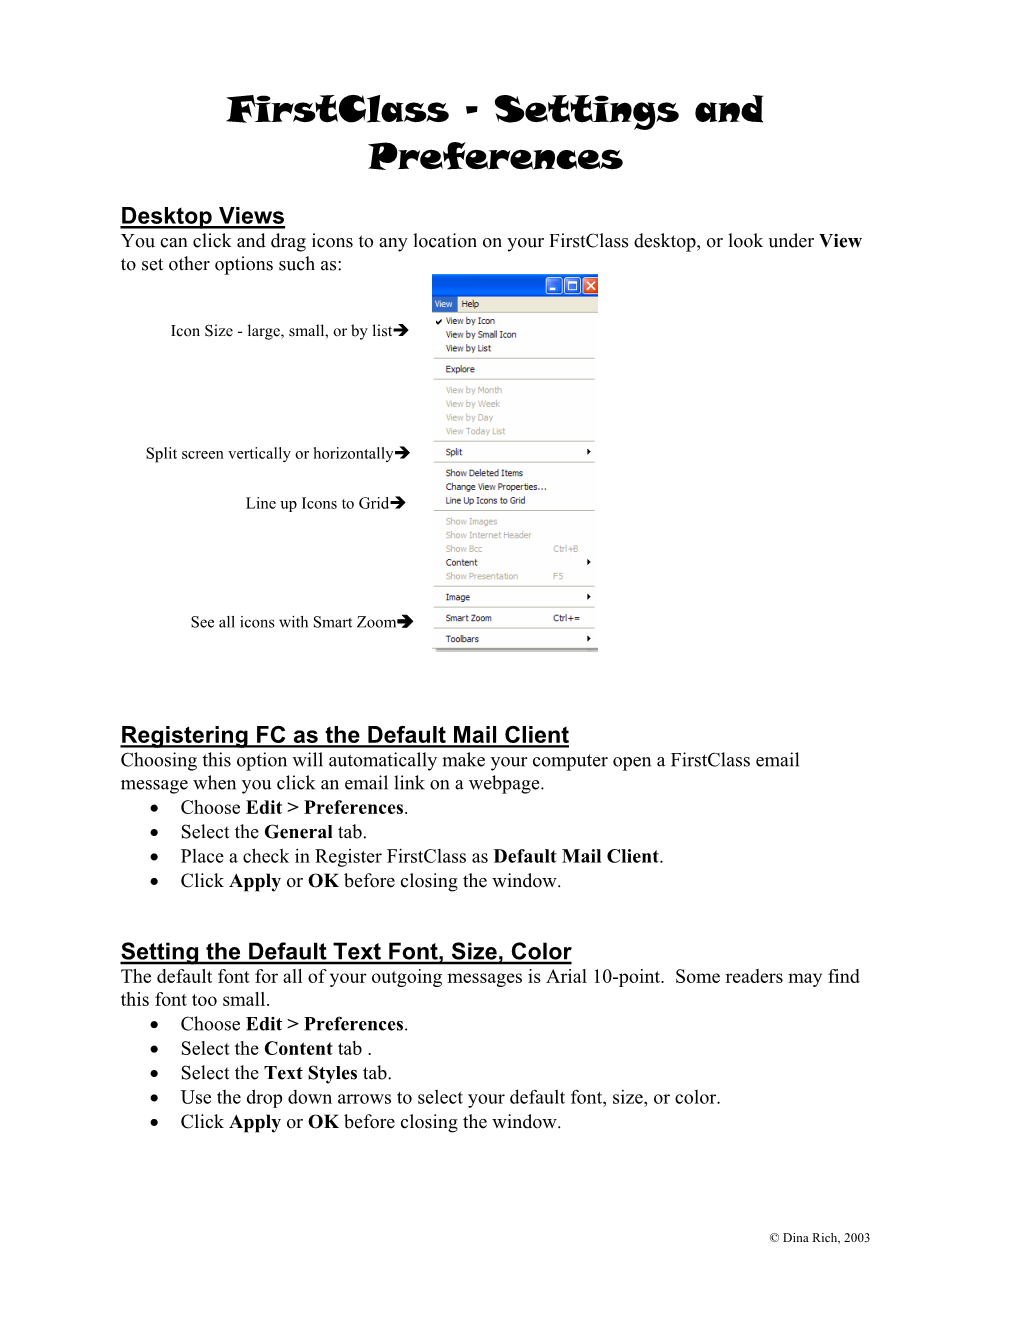 Firstclass – Settings and Preferences